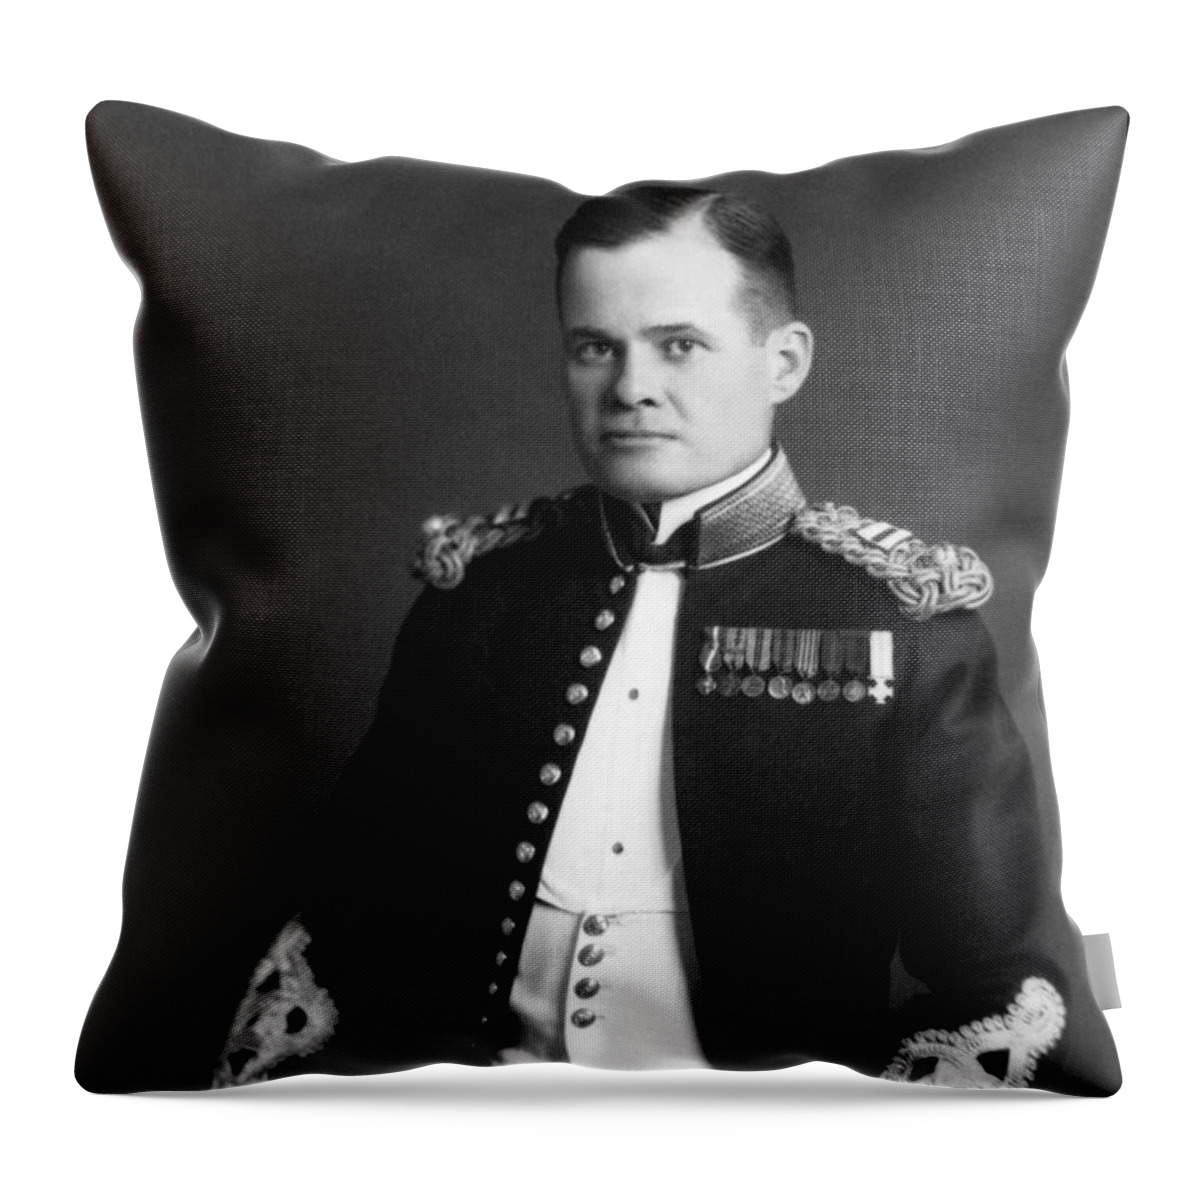 Marine Corps Throw Pillow featuring the photograph Lewis Chesty Puller - Two by War Is Hell Store